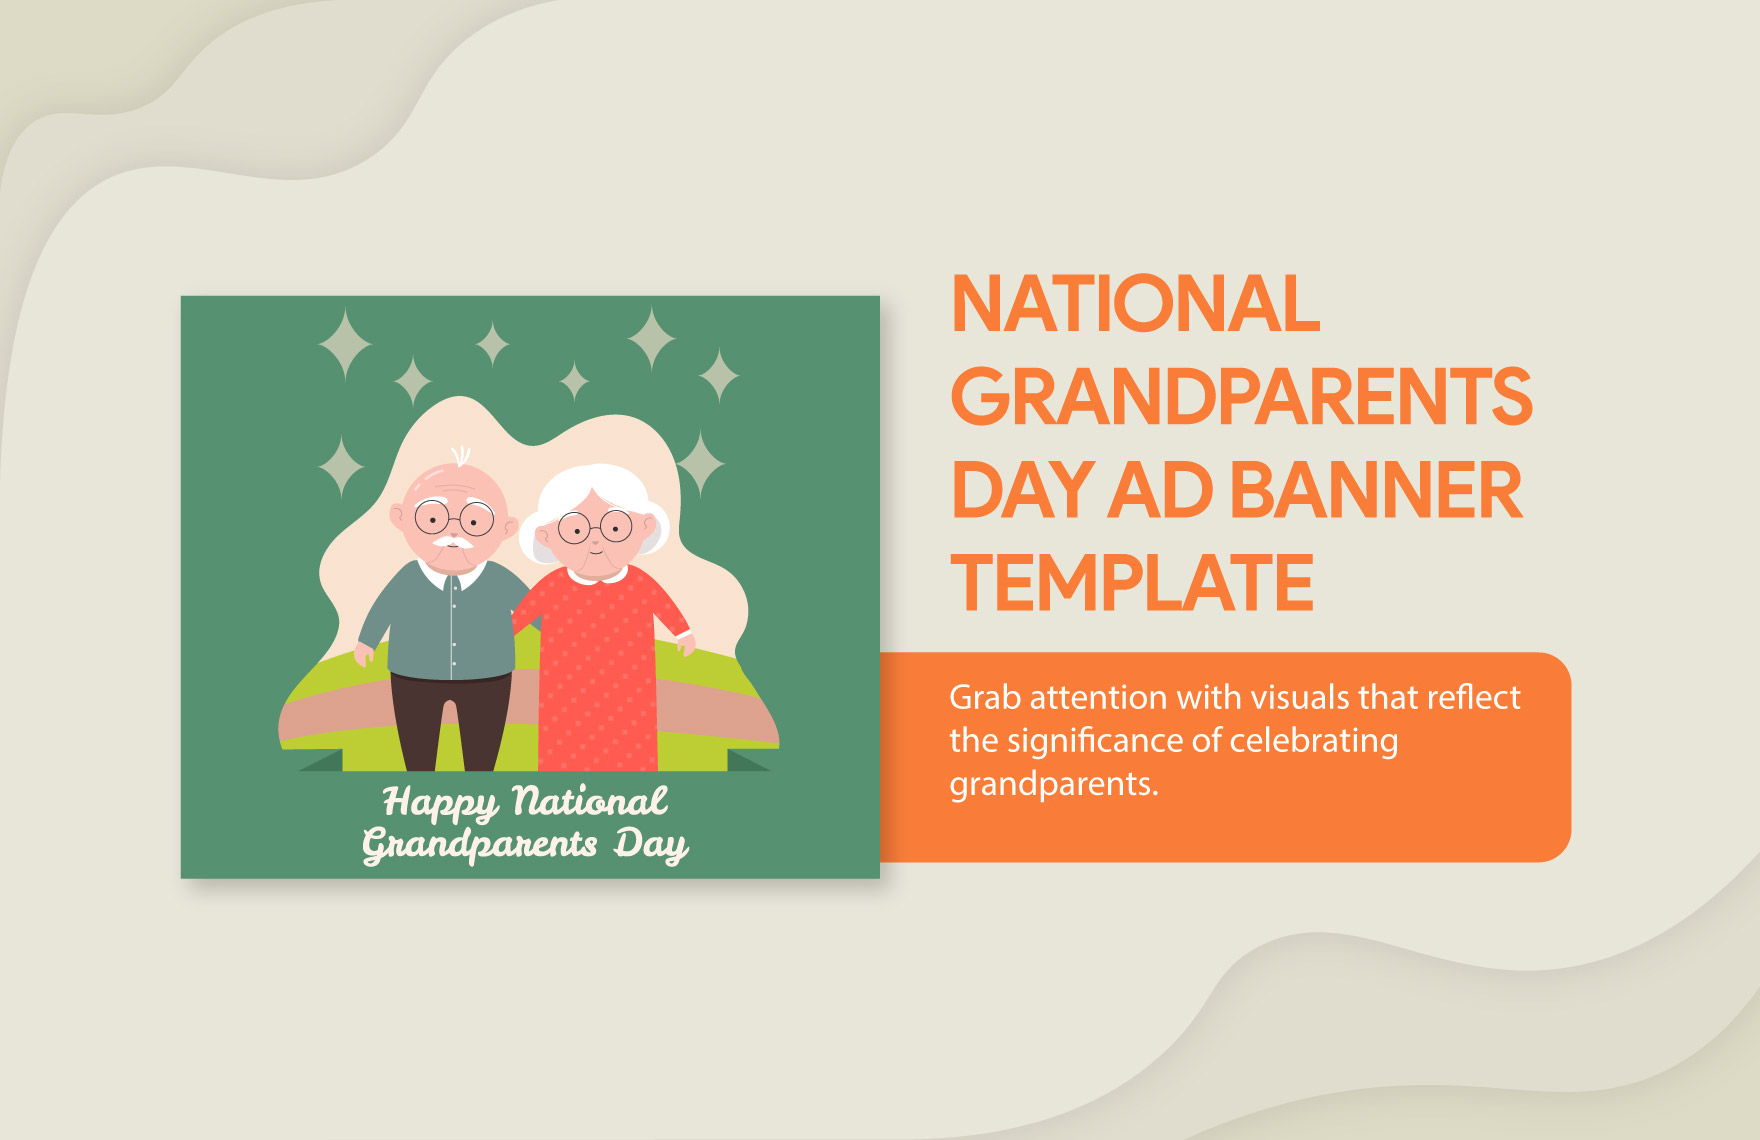 Free National Grandparents Day Ad Banner Template in PDF, Illustrator, PSD